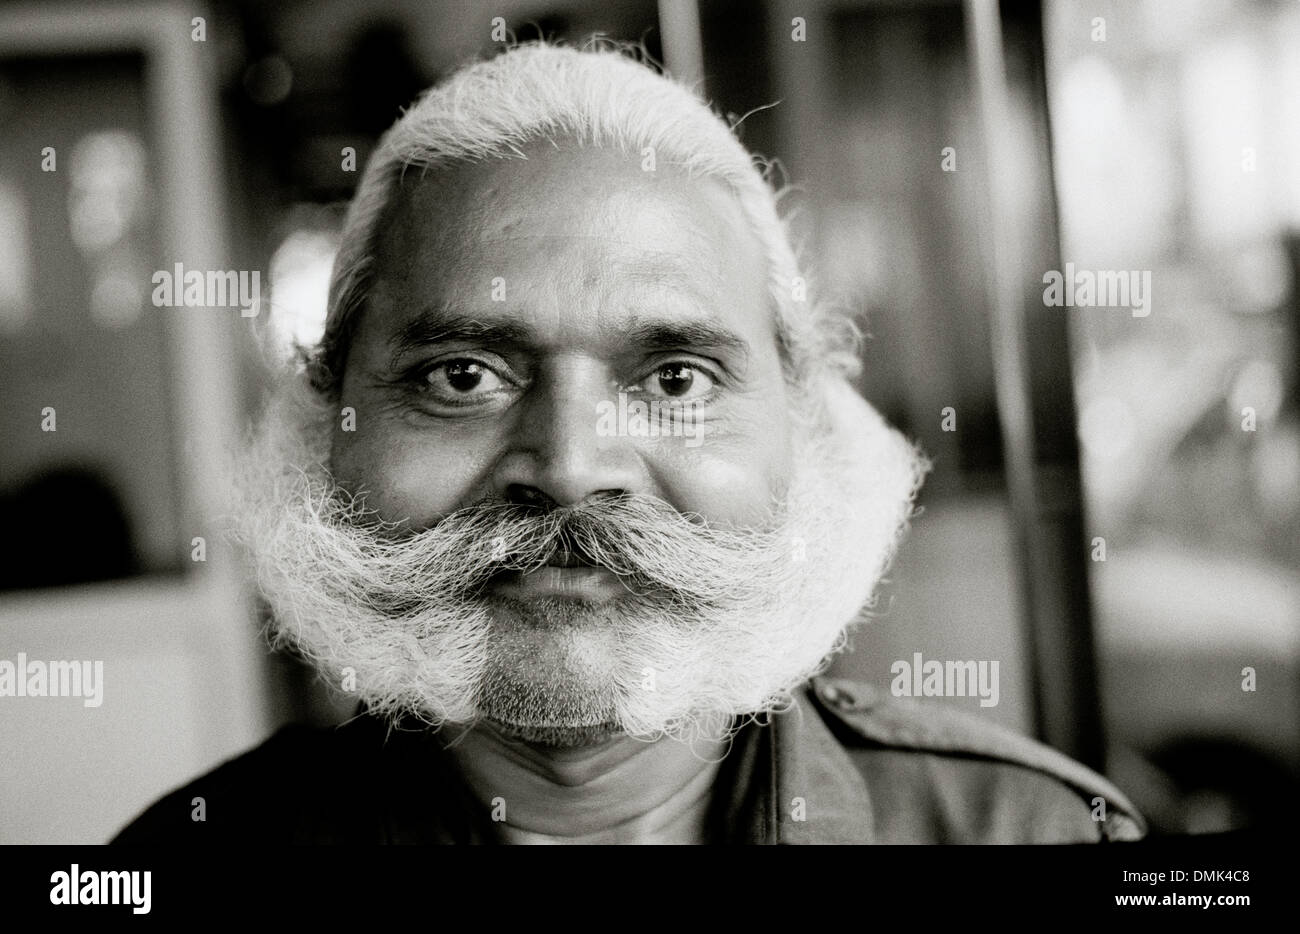 Man with moustache in Mumbai Bombay in Maharashtra in India in South Asia. Character Individuality Real People Portrait Portraiture Travel Stock Photo